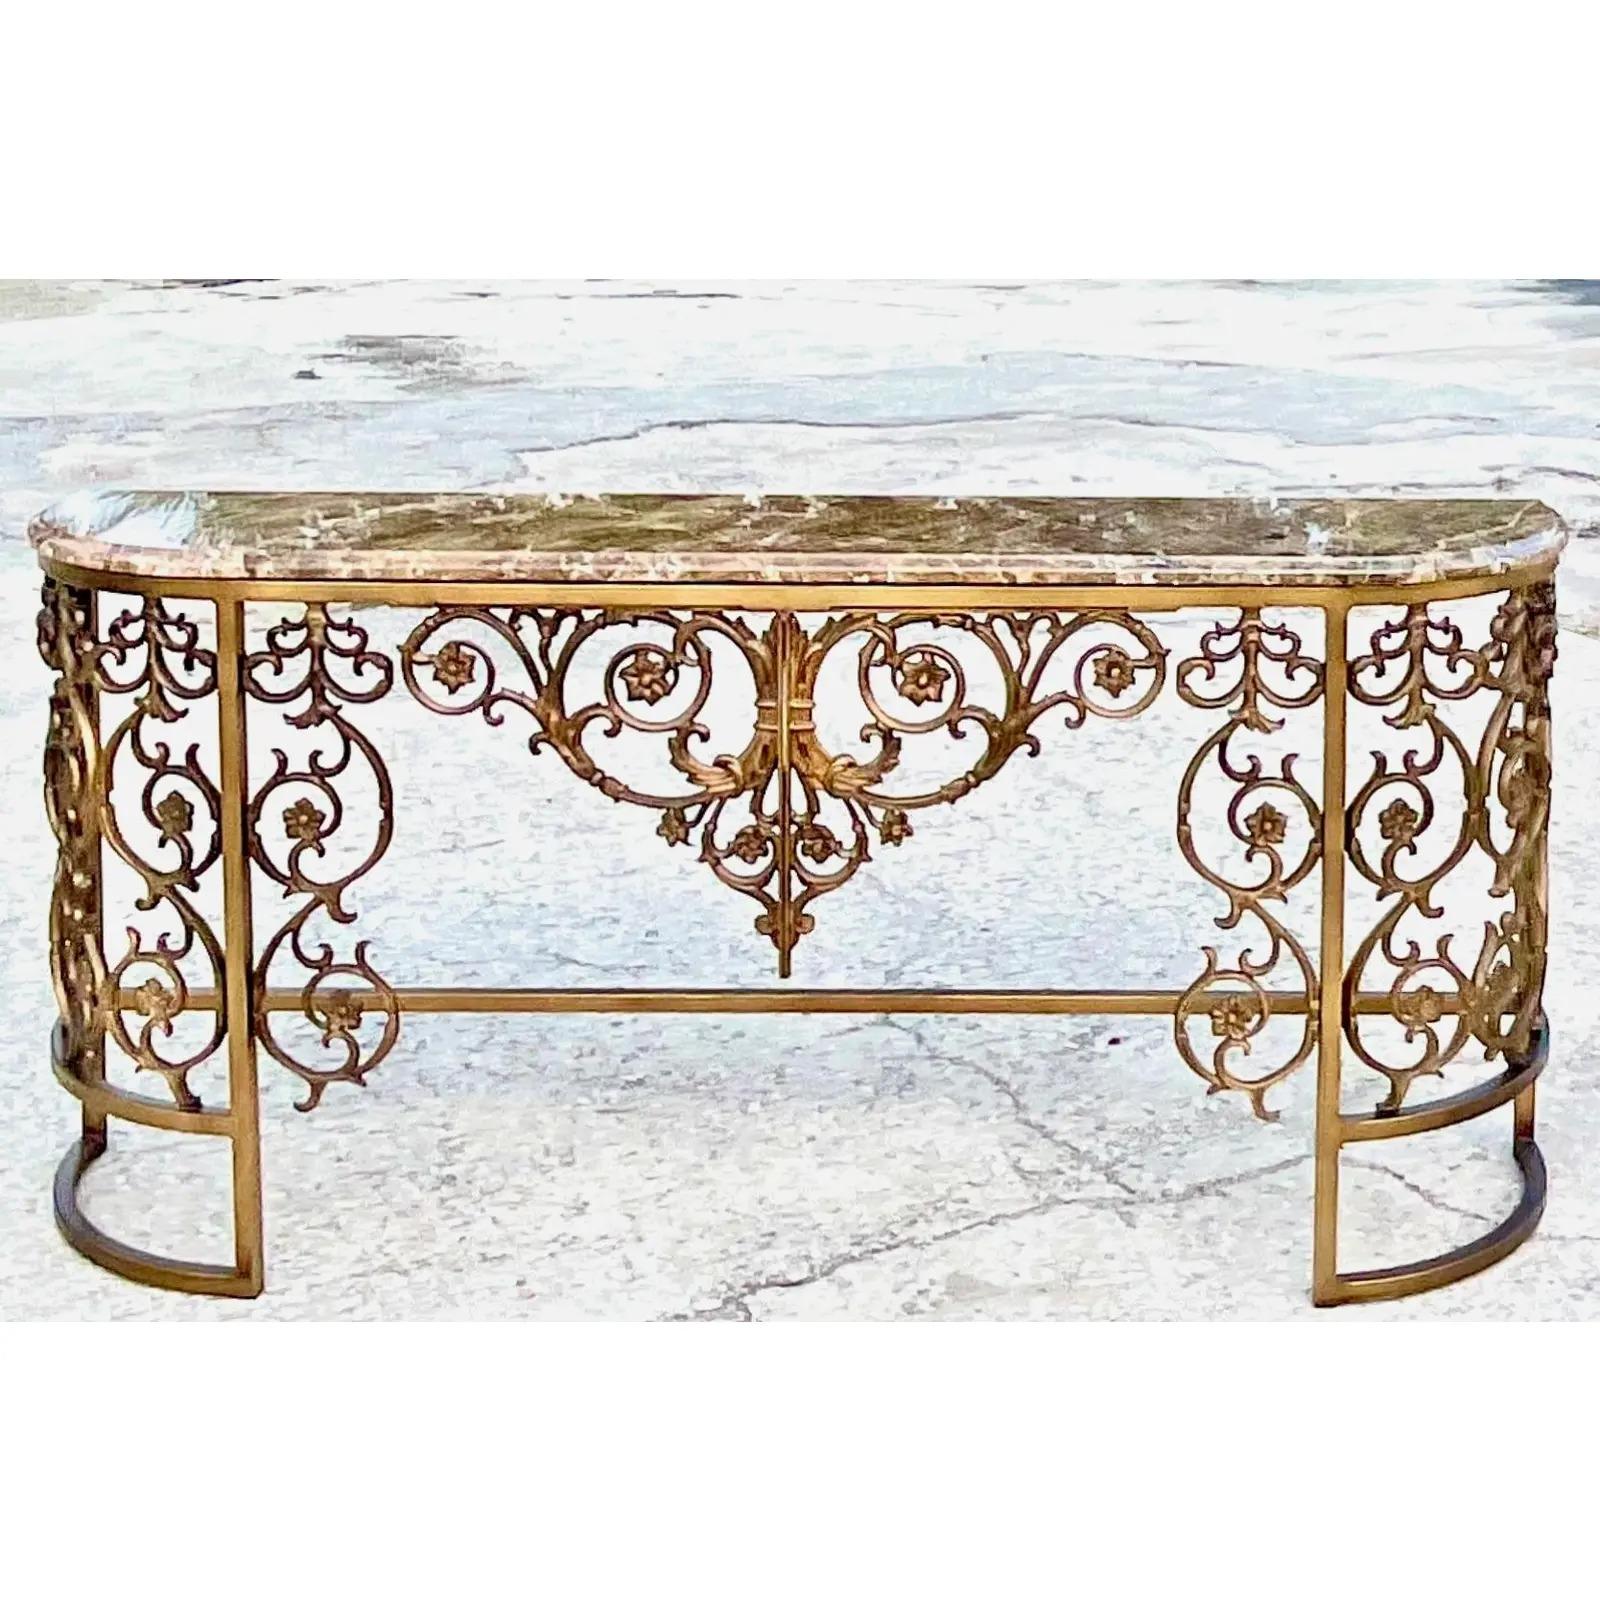 Fantastic vintage Regency console table. Stone top and a matte gilt wrought iron base. A stunning piece. Perfect indoors or in an outside covered area. Acquired from a Palm Beach estate.